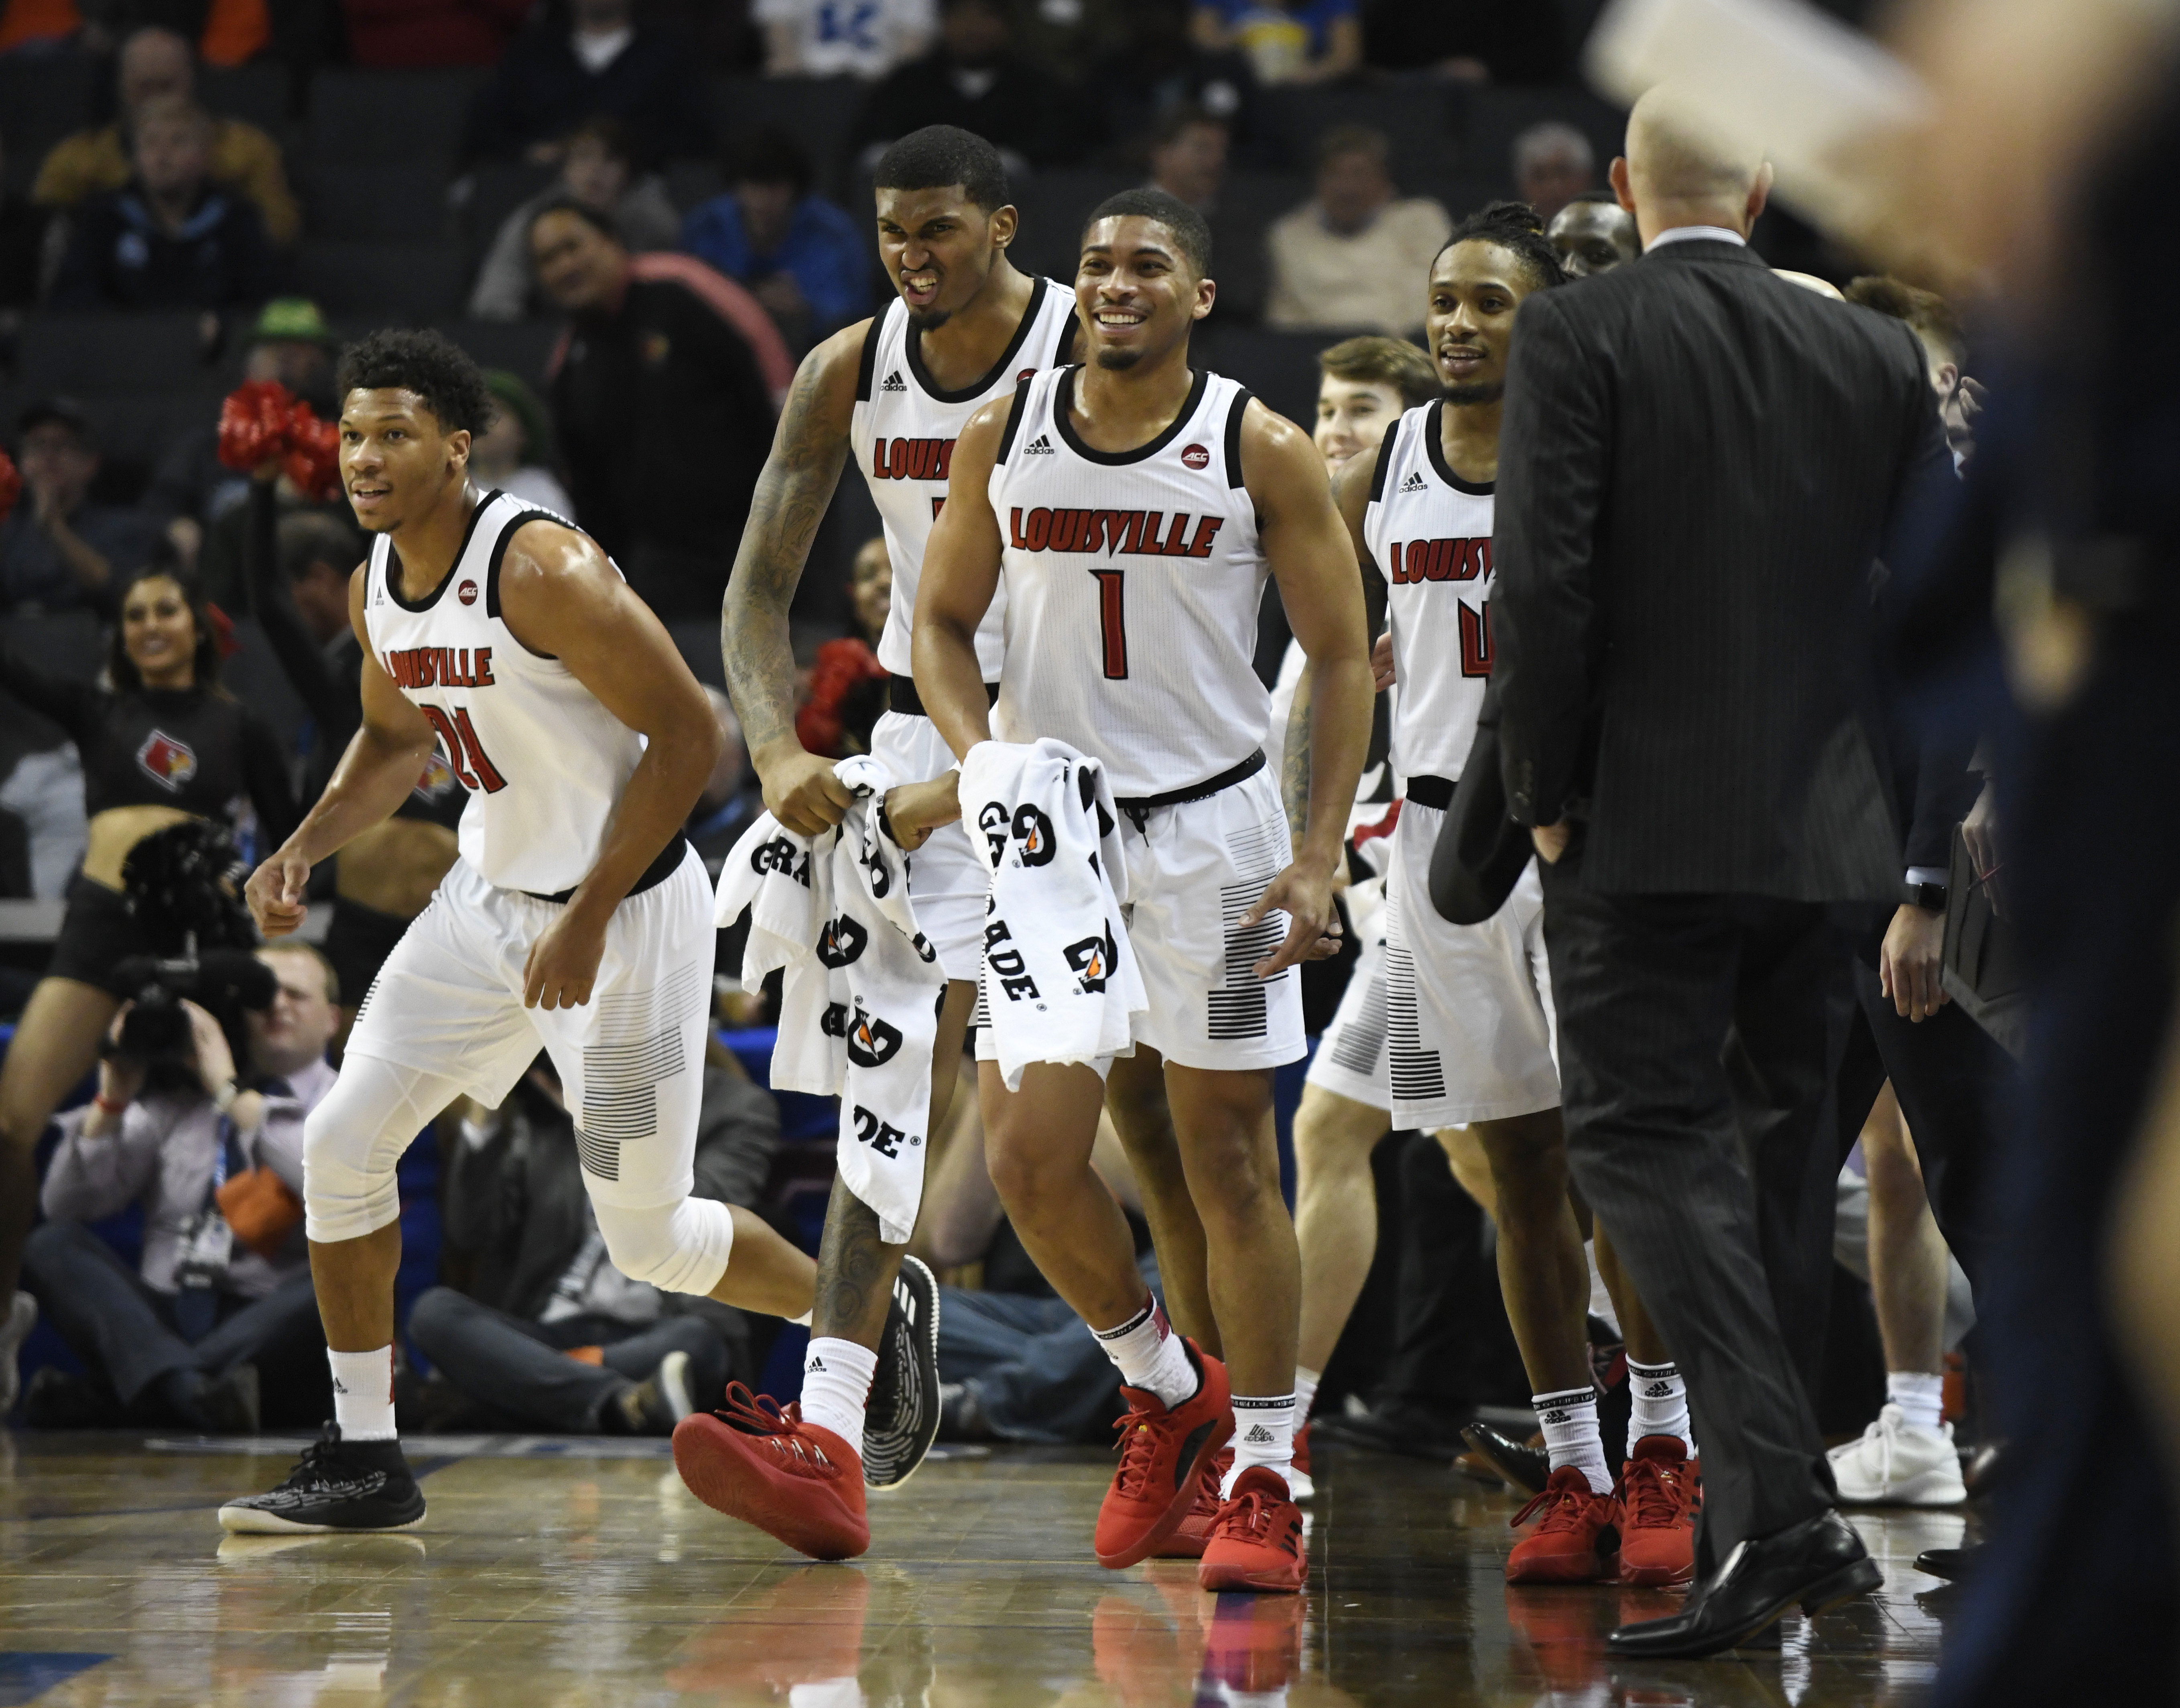 Louisville Basketball Adds 4 Walk-Ons For 2020-2021 – The Crunch Zone